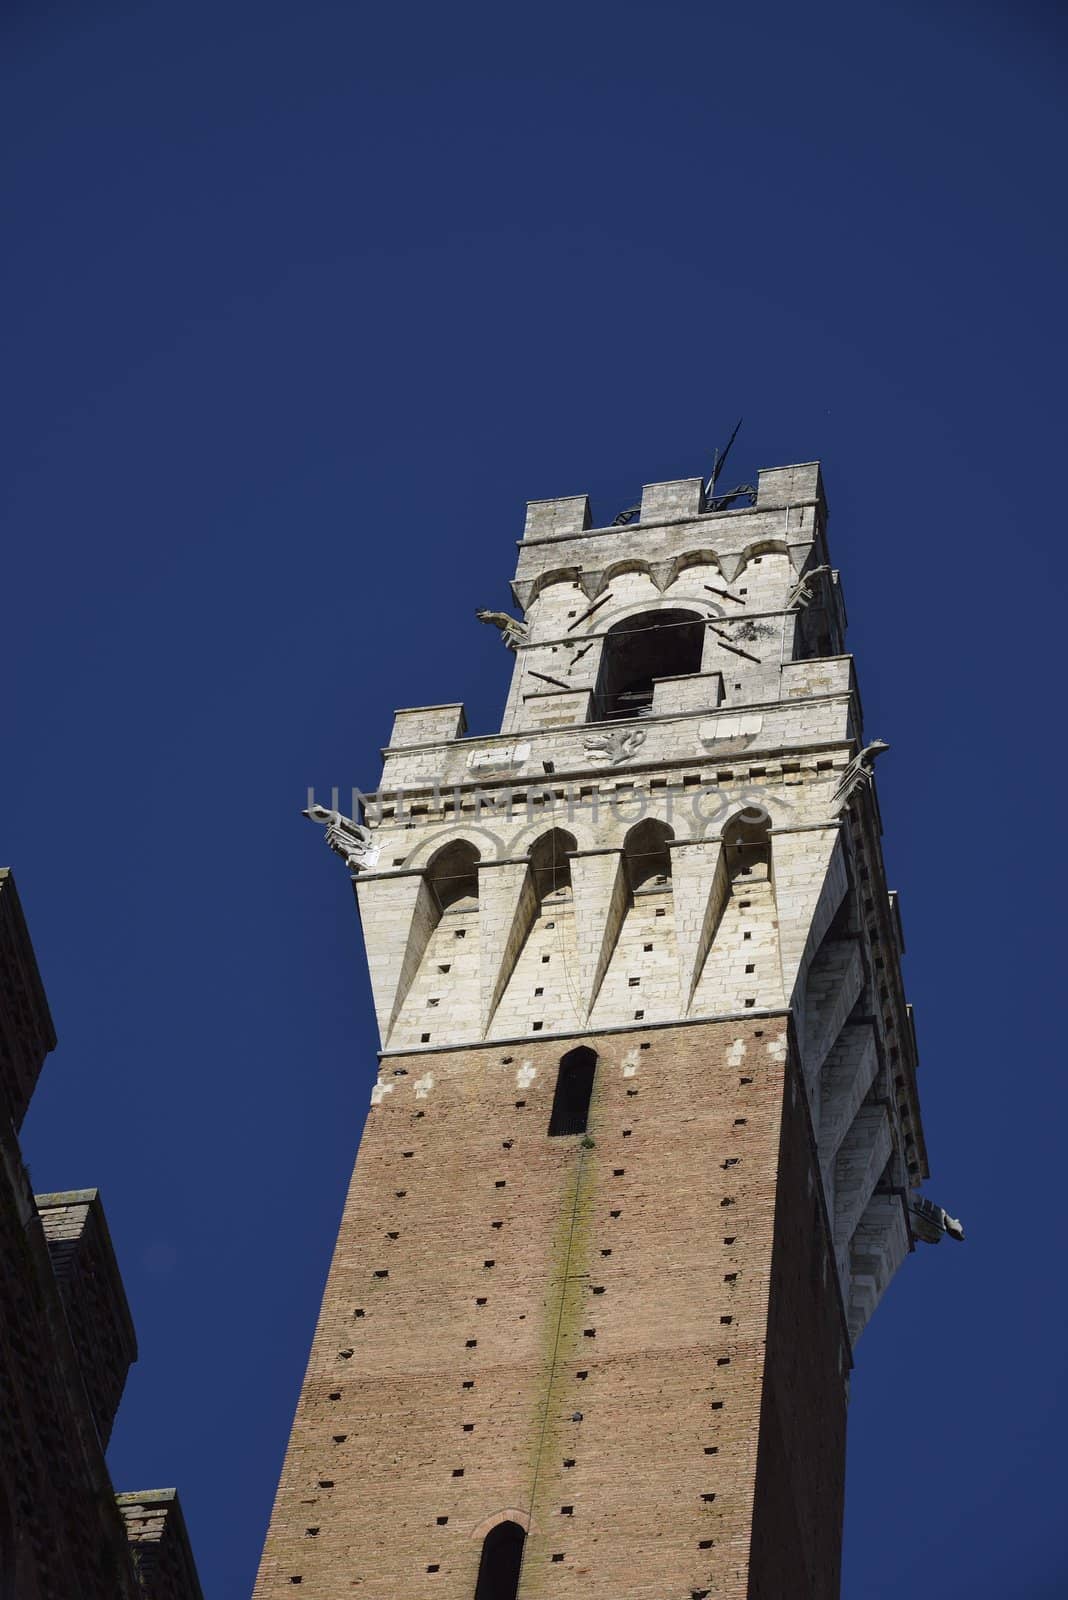 Siena (Italy) is one of the most beautiful medieval european town